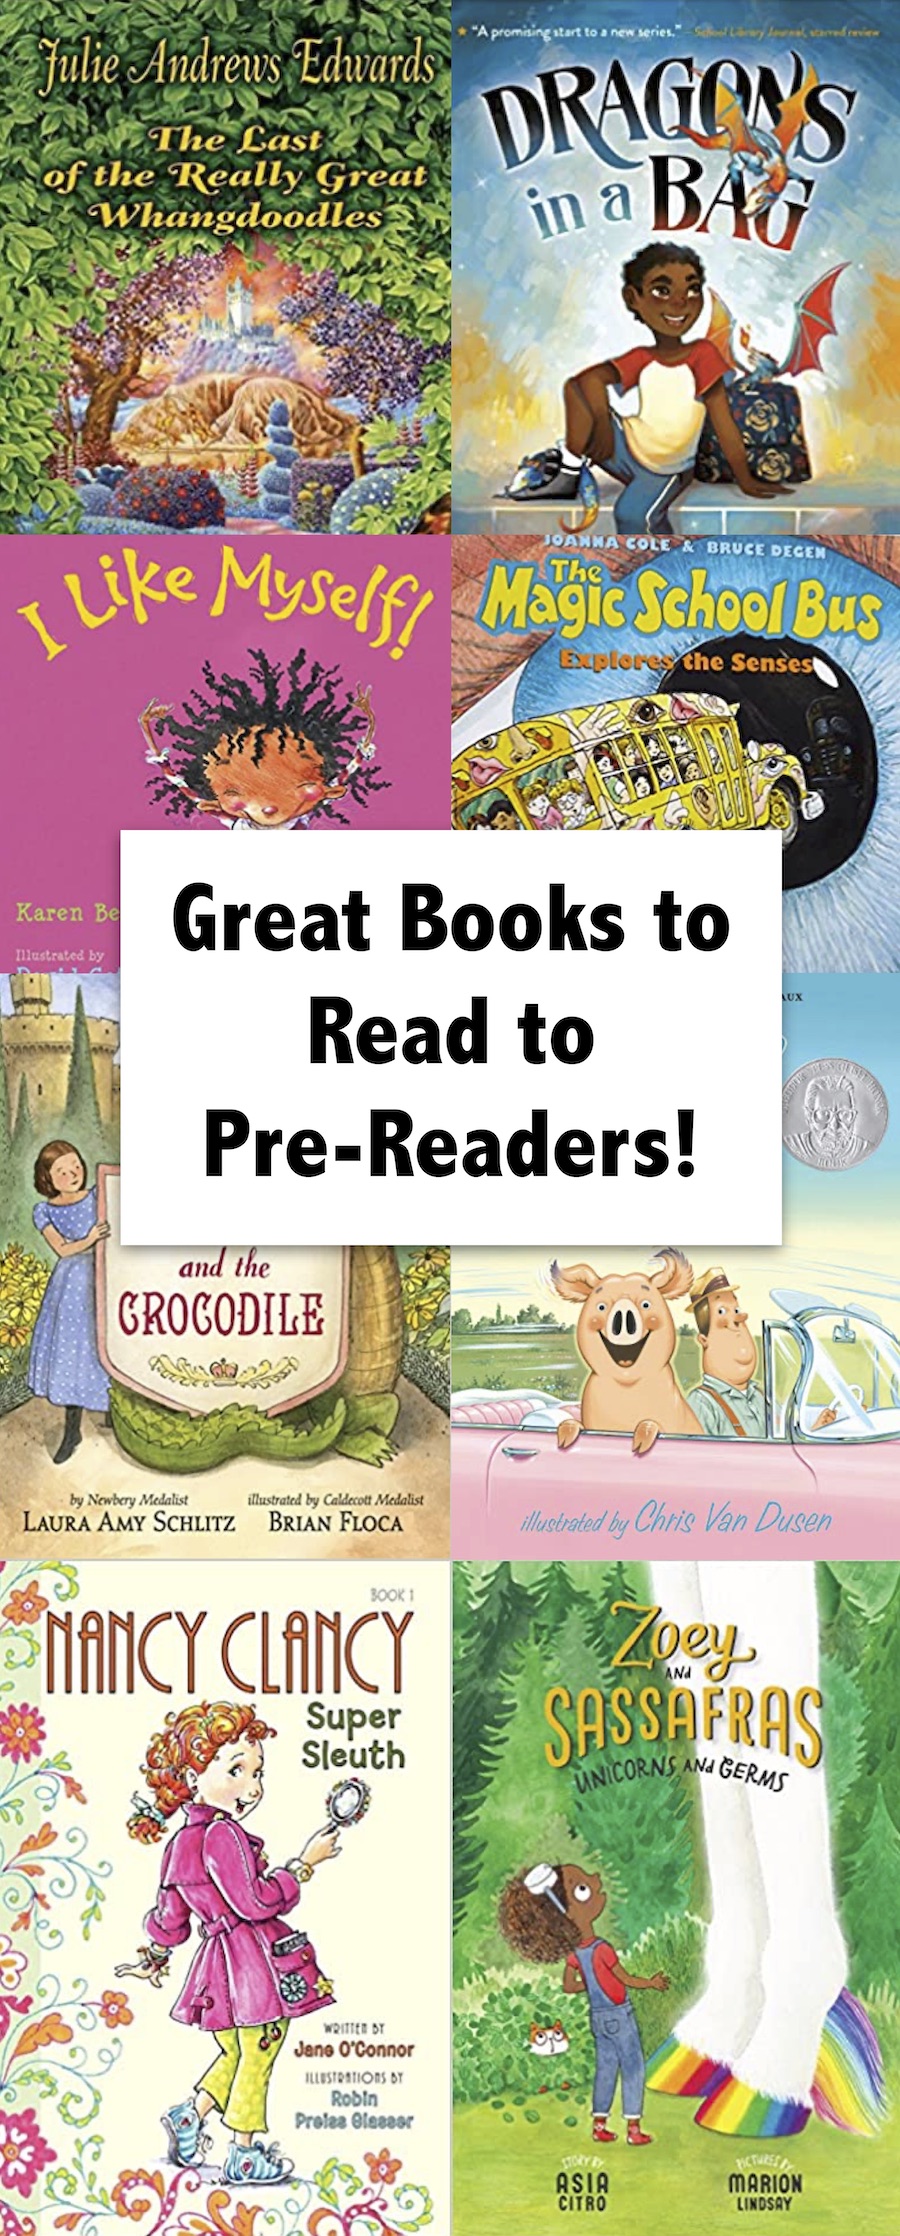 books-pinterest-prereaders Preschool Learning Tools and Books